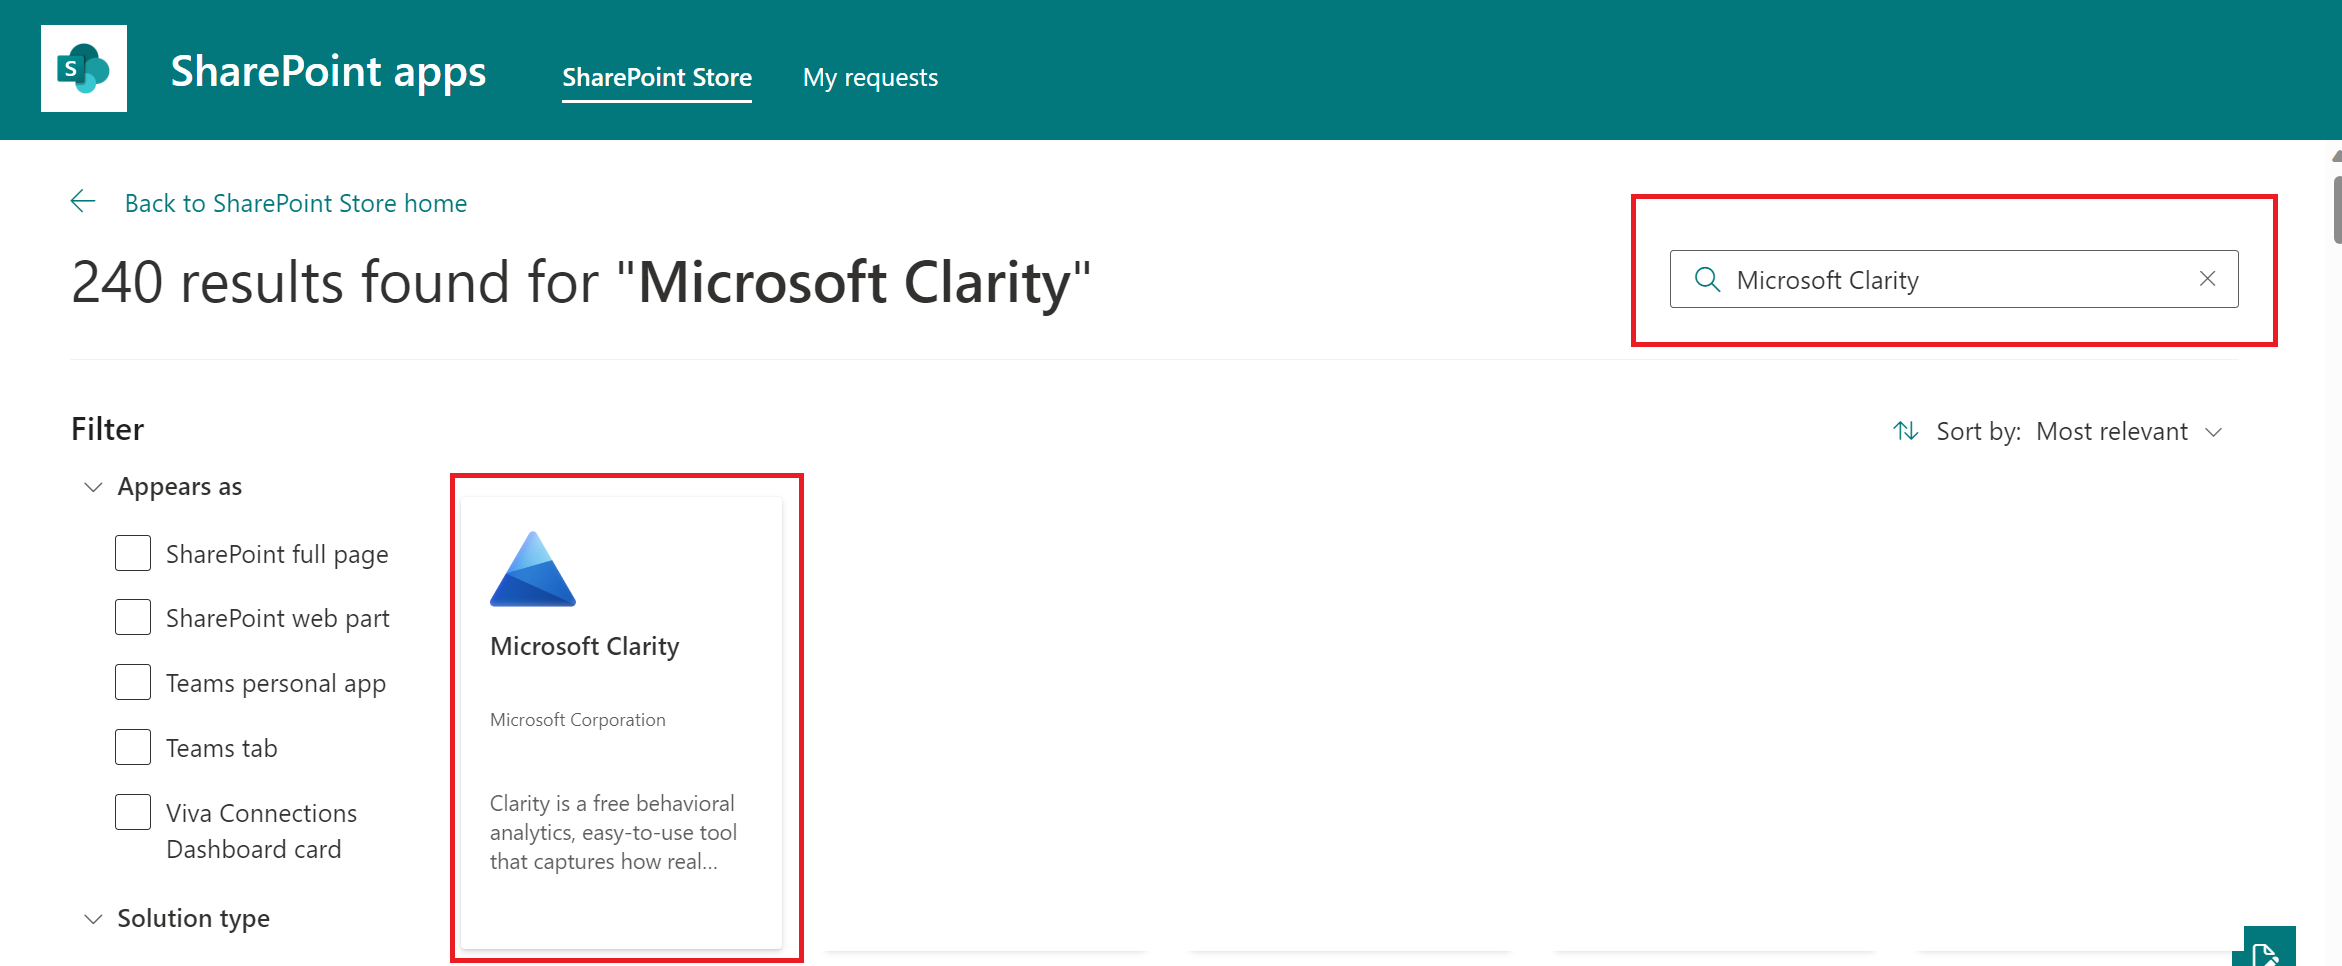 Find Clarity in SharePoint store.